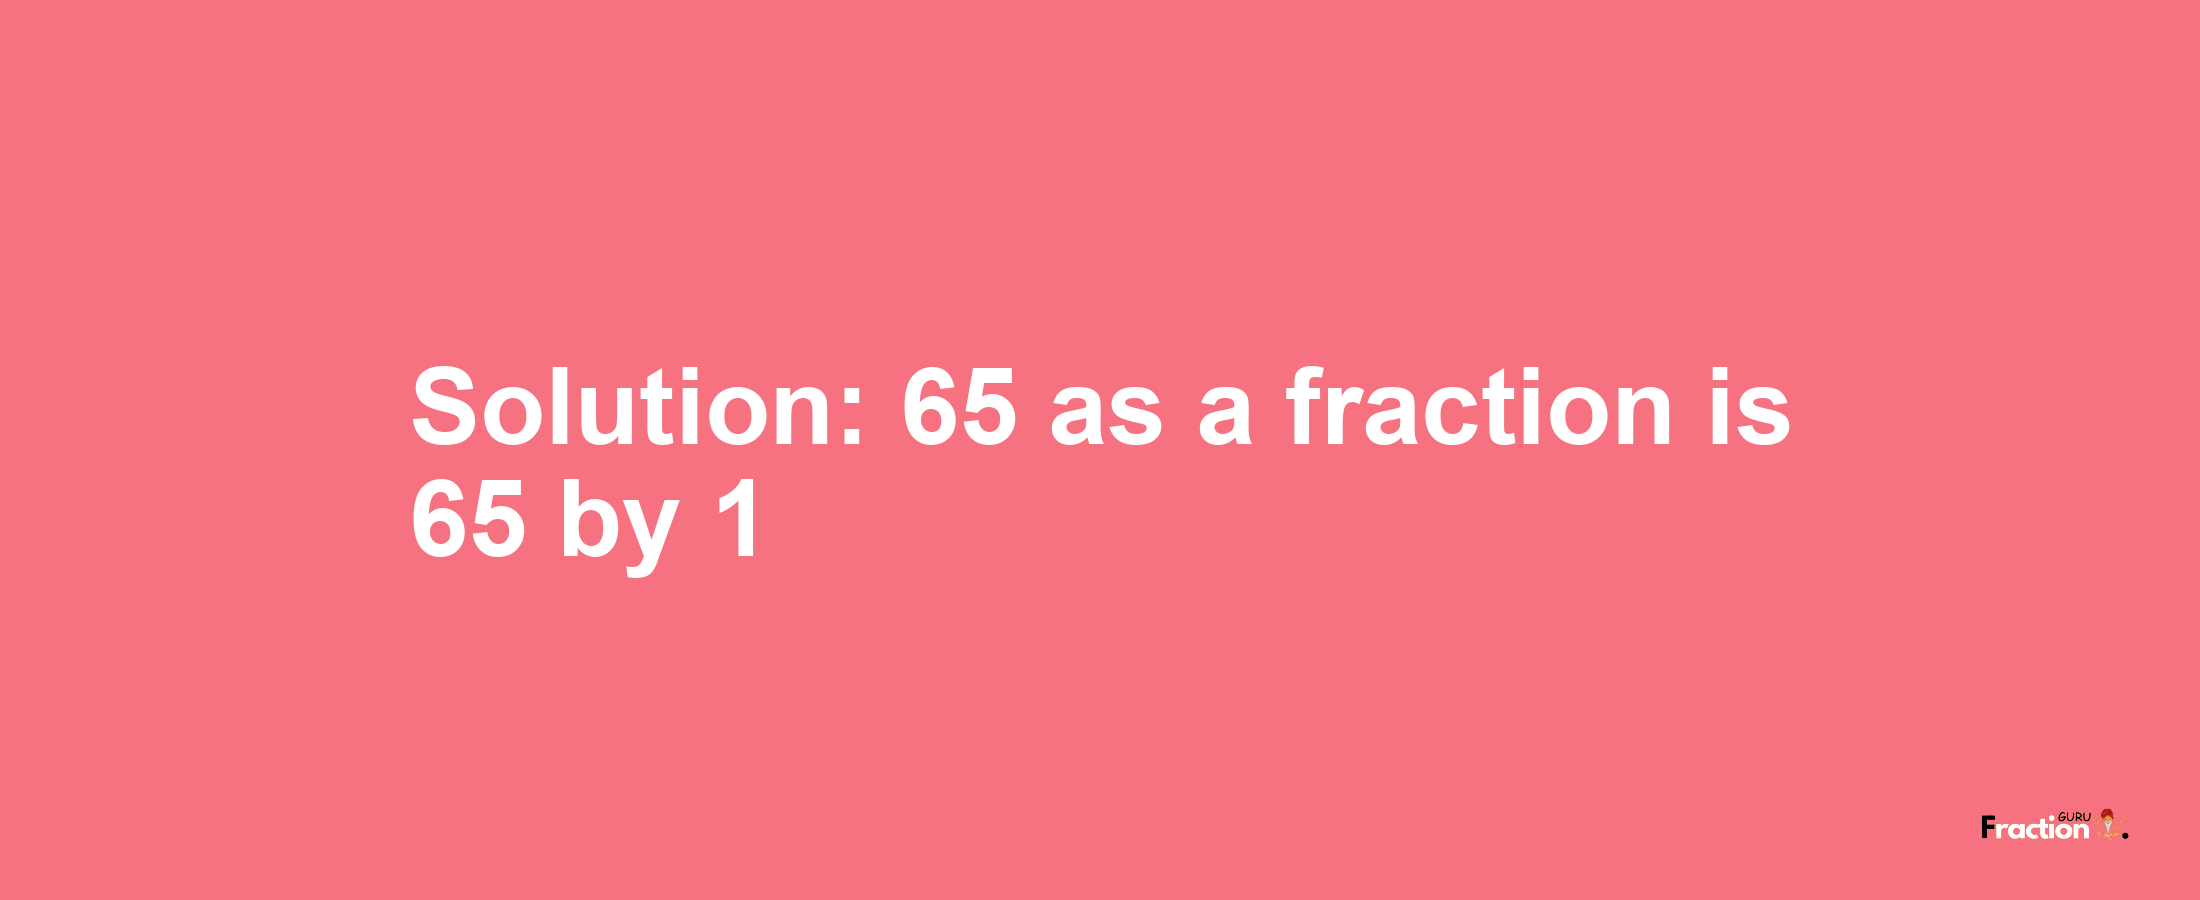 Solution:65 as a fraction is 65/1